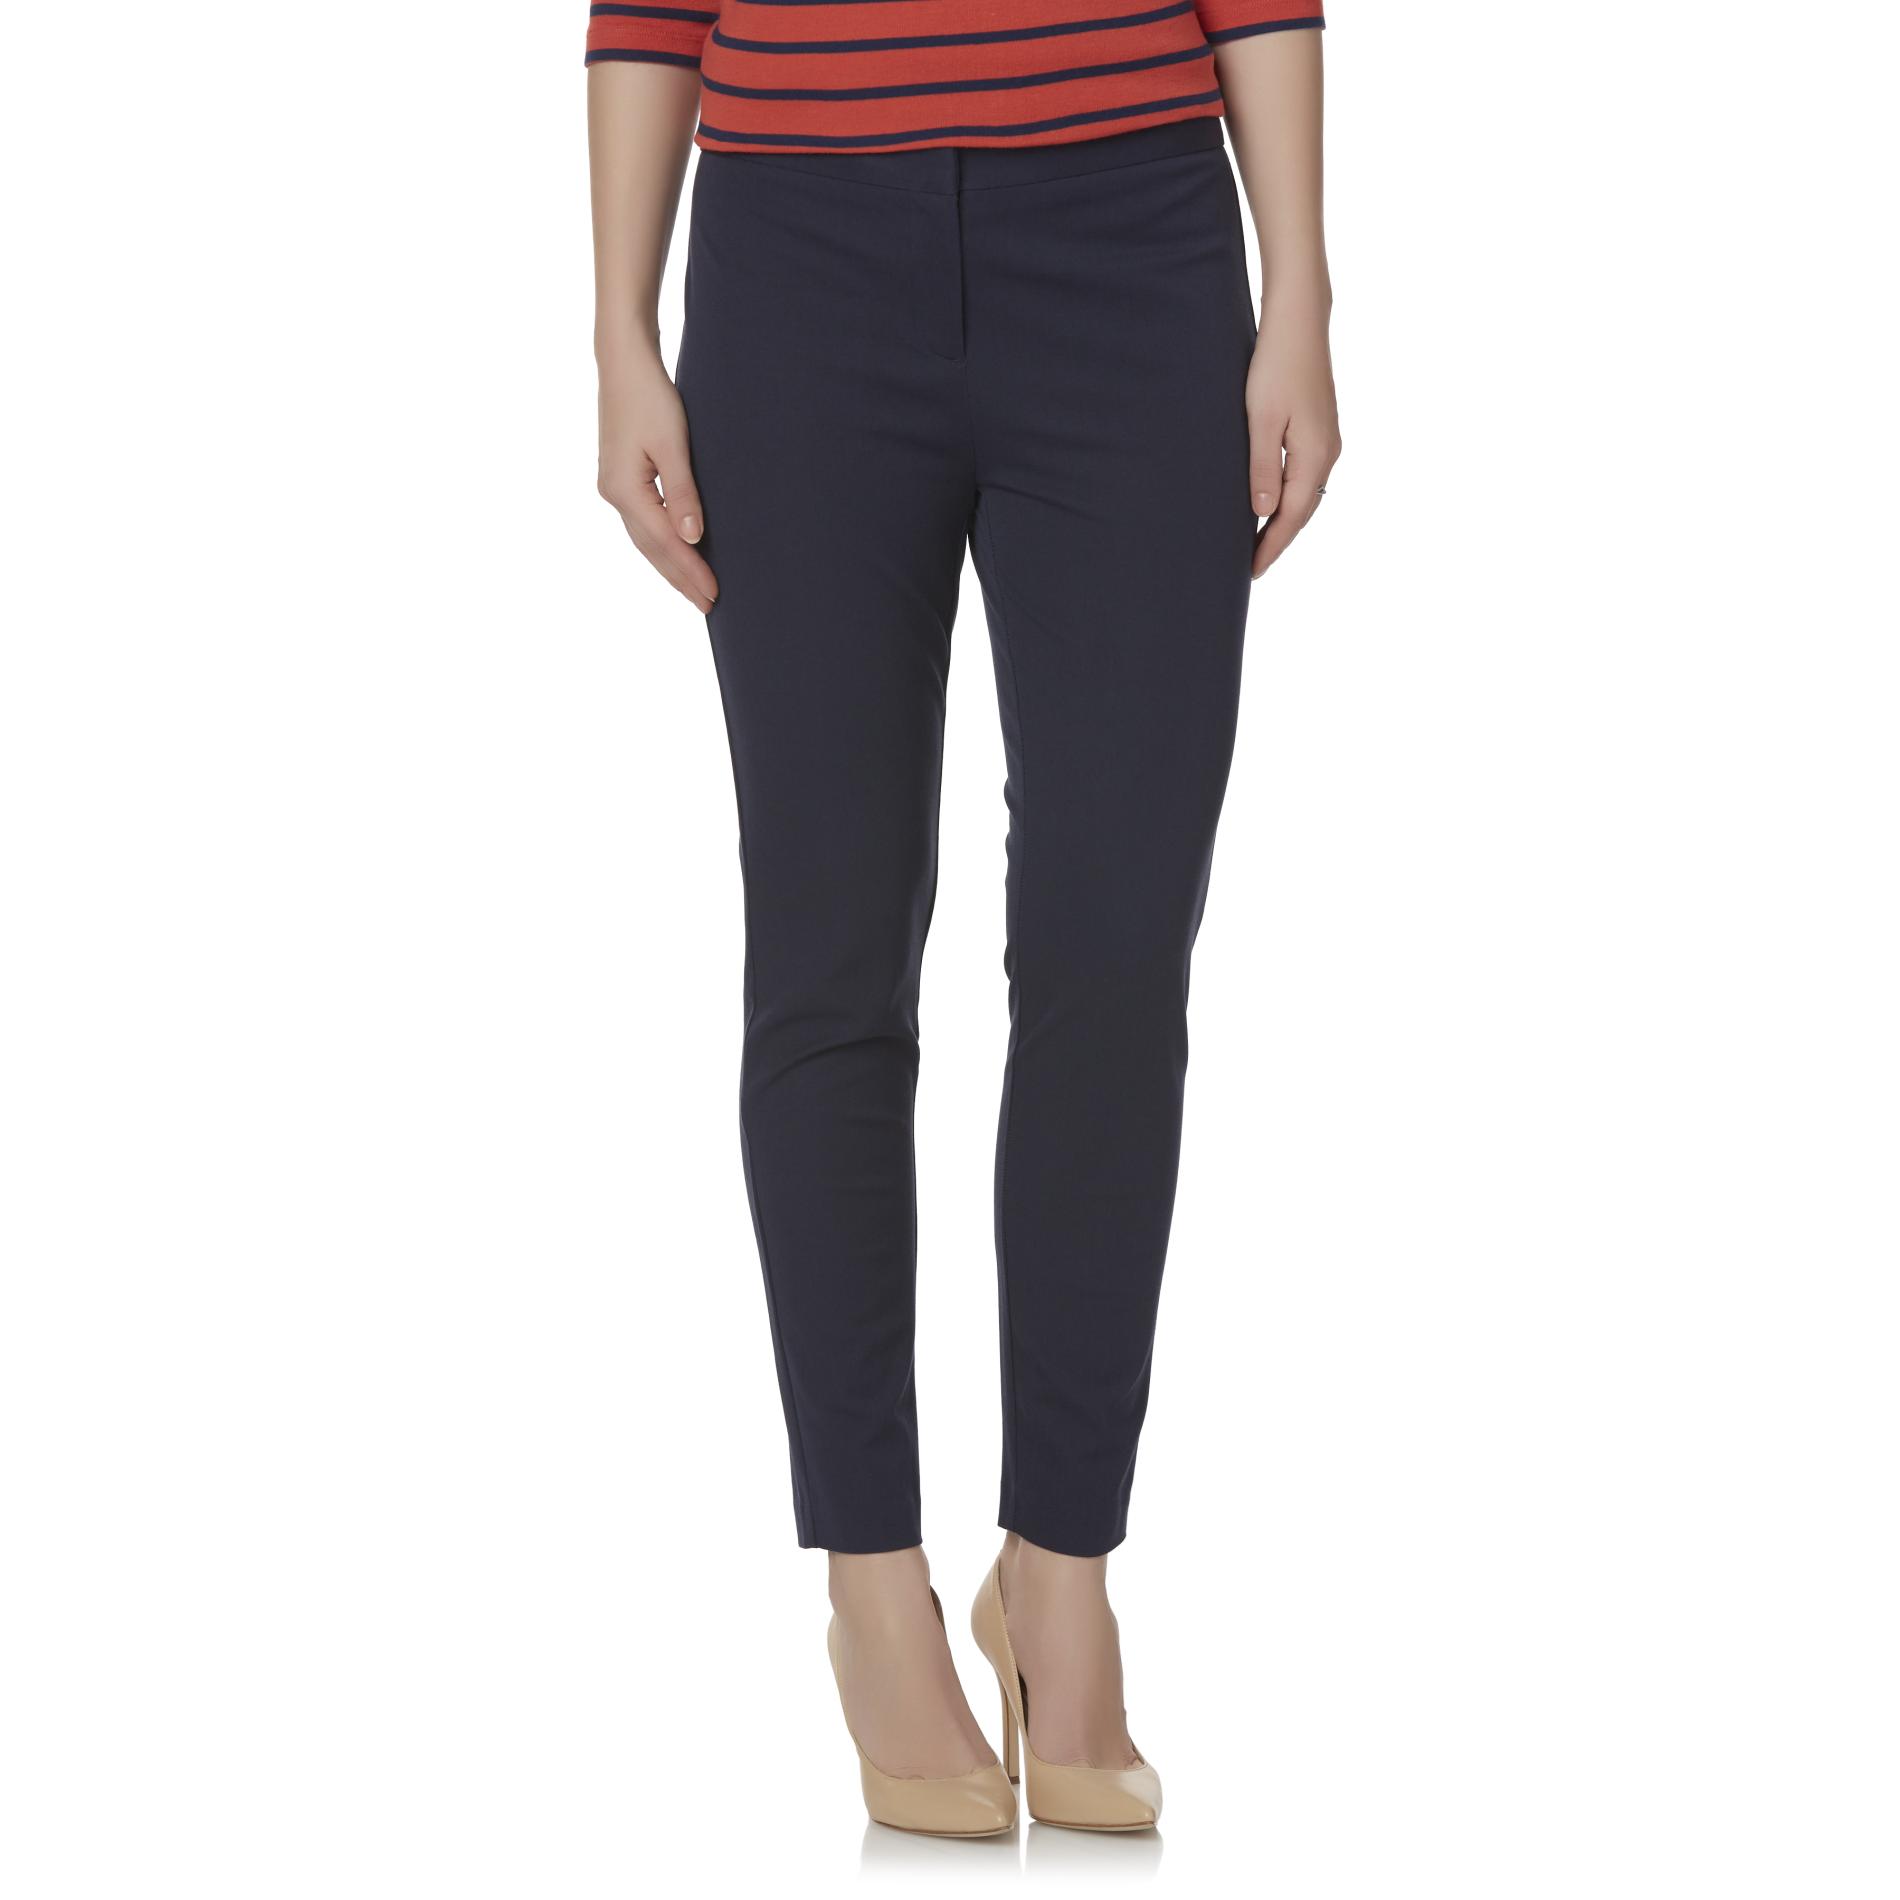 Simply Styled Women's Skinny Ankle Pants